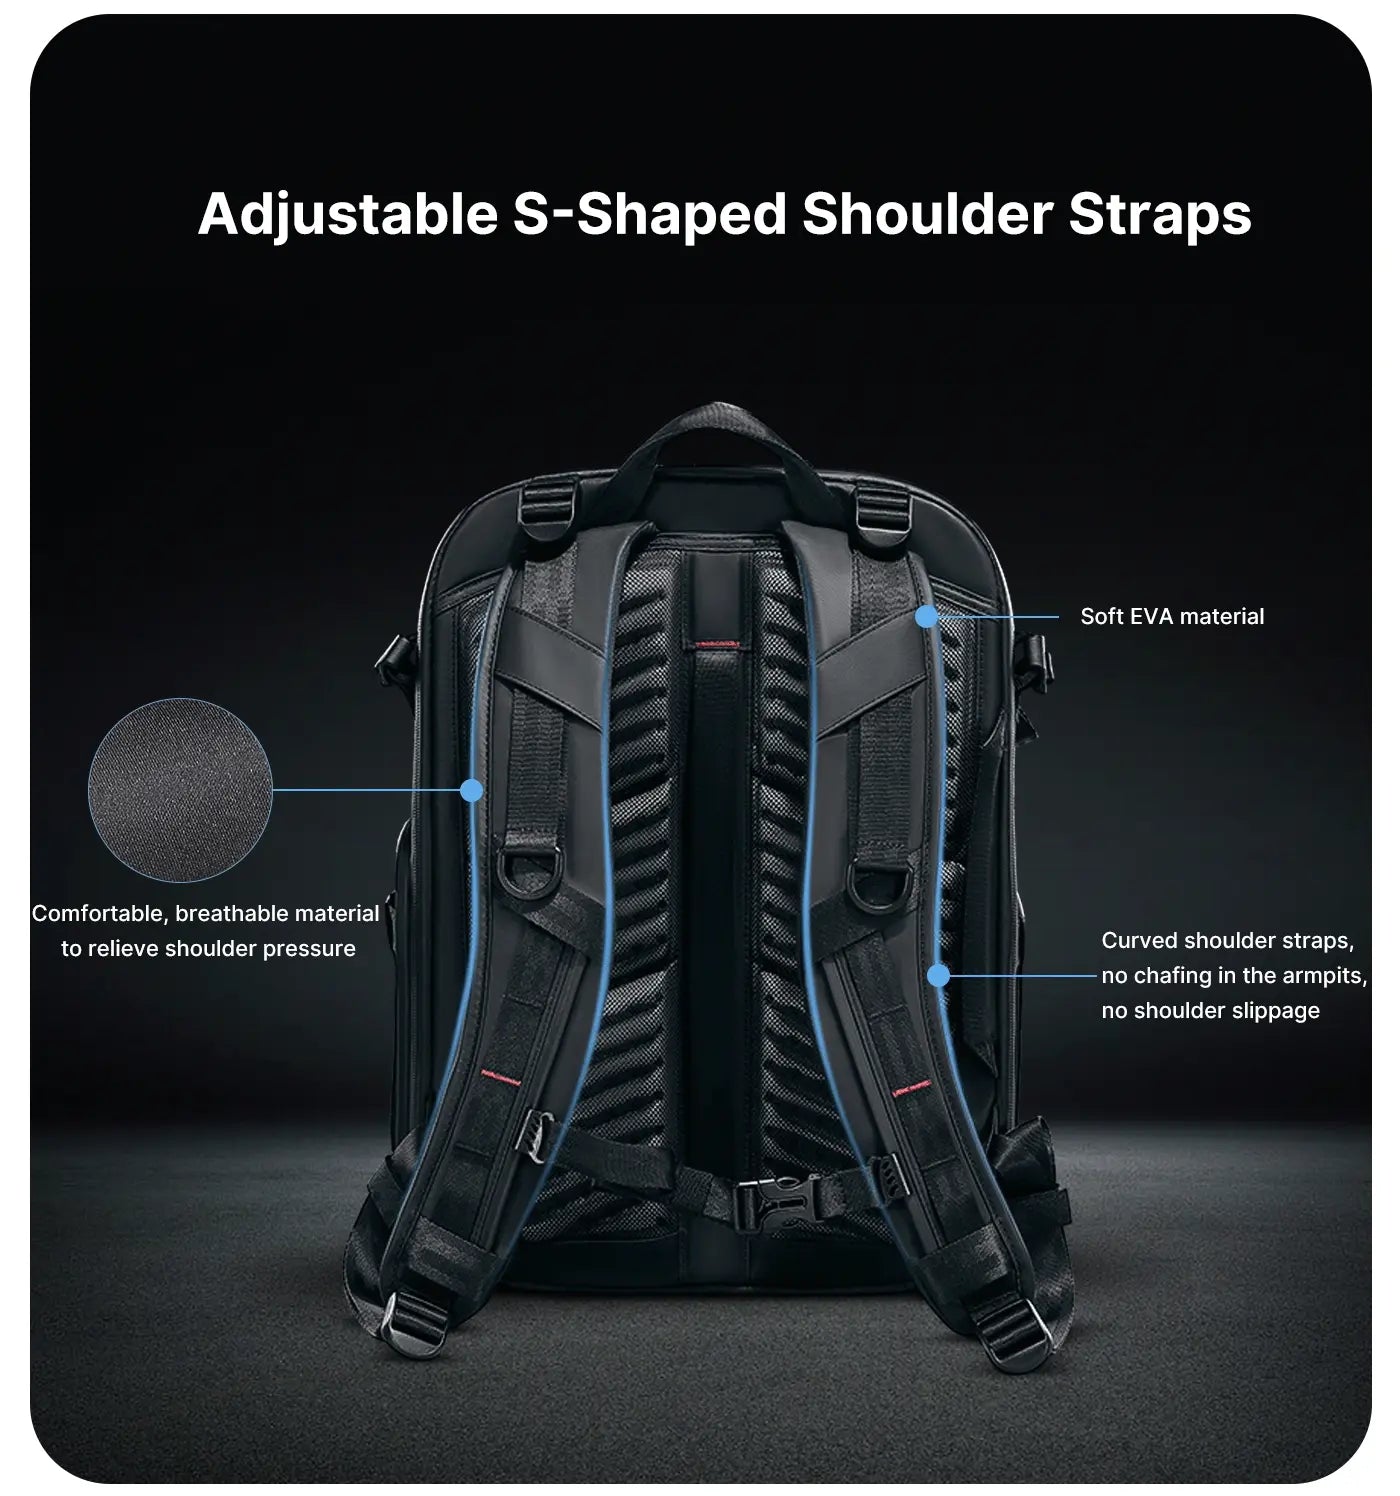 Photography Backpack with Large Capacity